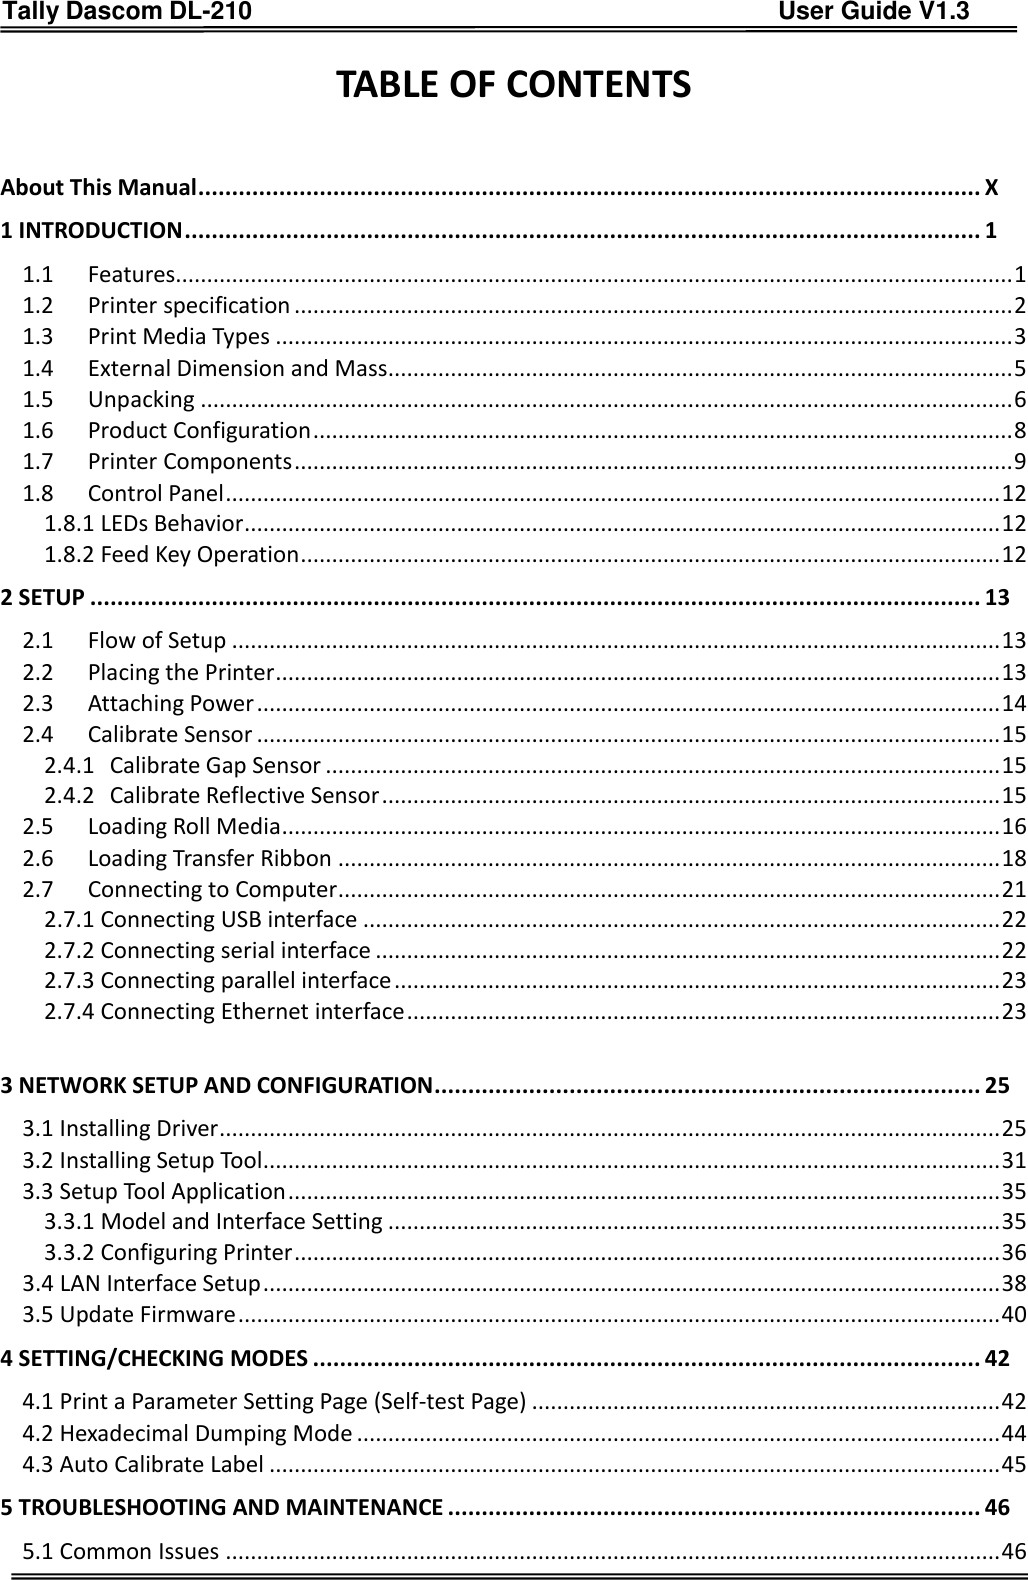 Tally Dascom DL-210                                          User Guide V1.3     TABLE OF CONTENTS  About This Manual .................................................................................................................... X 1 INTRODUCTION ...................................................................................................................... 1 1.1 Features...................................................................................................................................... 1 1.2 Printer specification ................................................................................................................... 2 1.3 Print Media Types ...................................................................................................................... 3 1.4 External Dimension and Mass.................................................................................................... 5 1.5 Unpacking .................................................................................................................................. 6 1.6 Product Configuration ................................................................................................................ 8 1.7 Printer Components ................................................................................................................... 9 1.8 Control Panel ............................................................................................................................ 12 1.8.1 LEDs Behavior ......................................................................................................................... 12 1.8.2 Feed Key Operation ................................................................................................................ 12 2 SETUP .................................................................................................................................... 13 2.1 Flow of Setup ........................................................................................................................... 13 2.2 Placing the Printer .................................................................................................................... 13 2.3 Attaching Power ....................................................................................................................... 14 2.4 Calibrate Sensor ....................................................................................................................... 15 2.4.1 Calibrate Gap Sensor ............................................................................................................ 15 2.4.2 Calibrate Reflective Sensor ................................................................................................... 15 2.5 Loading Roll Media ................................................................................................................... 16 2.6 Loading Transfer Ribbon .......................................................................................................... 18 2.7 Connecting to Computer .......................................................................................................... 21 2.7.1 Connecting USB interface ...................................................................................................... 22 2.7.2 Connecting serial interface .................................................................................................... 22 2.7.3 Connecting parallel interface ................................................................................................. 23 2.7.4 Connecting Ethernet interface ............................................................................................... 23 2.7.5 Connecting Wlan Interface .................................................................................................... 24 3 NETWORK SETUP AND CONFIGURATION ................................................................................. 25 3.1 Installing Driver ............................................................................................................................. 25 3.2 Installing Setup Tool ...................................................................................................................... 31 3.3 Setup Tool Application .................................................................................................................. 35 3.3.1 Model and Interface Setting .................................................................................................. 35 3.3.2 Configuring Printer ................................................................................................................. 36 3.4 LAN Interface Setup ...................................................................................................................... 38 3.5 Update Firmware .......................................................................................................................... 40 4 SETTING/CHECKING MODES ................................................................................................... 42 4.1 Print a Parameter Setting Page (Self-test Page) ........................................................................... 42 4.2 Hexadecimal Dumping Mode ....................................................................................................... 44 4.3 Auto Calibrate Label ..................................................................................................................... 45 5 TROUBLESHOOTING AND MAINTENANCE ............................................................................... 46 5.1 Common Issues ............................................................................................................................ 46 